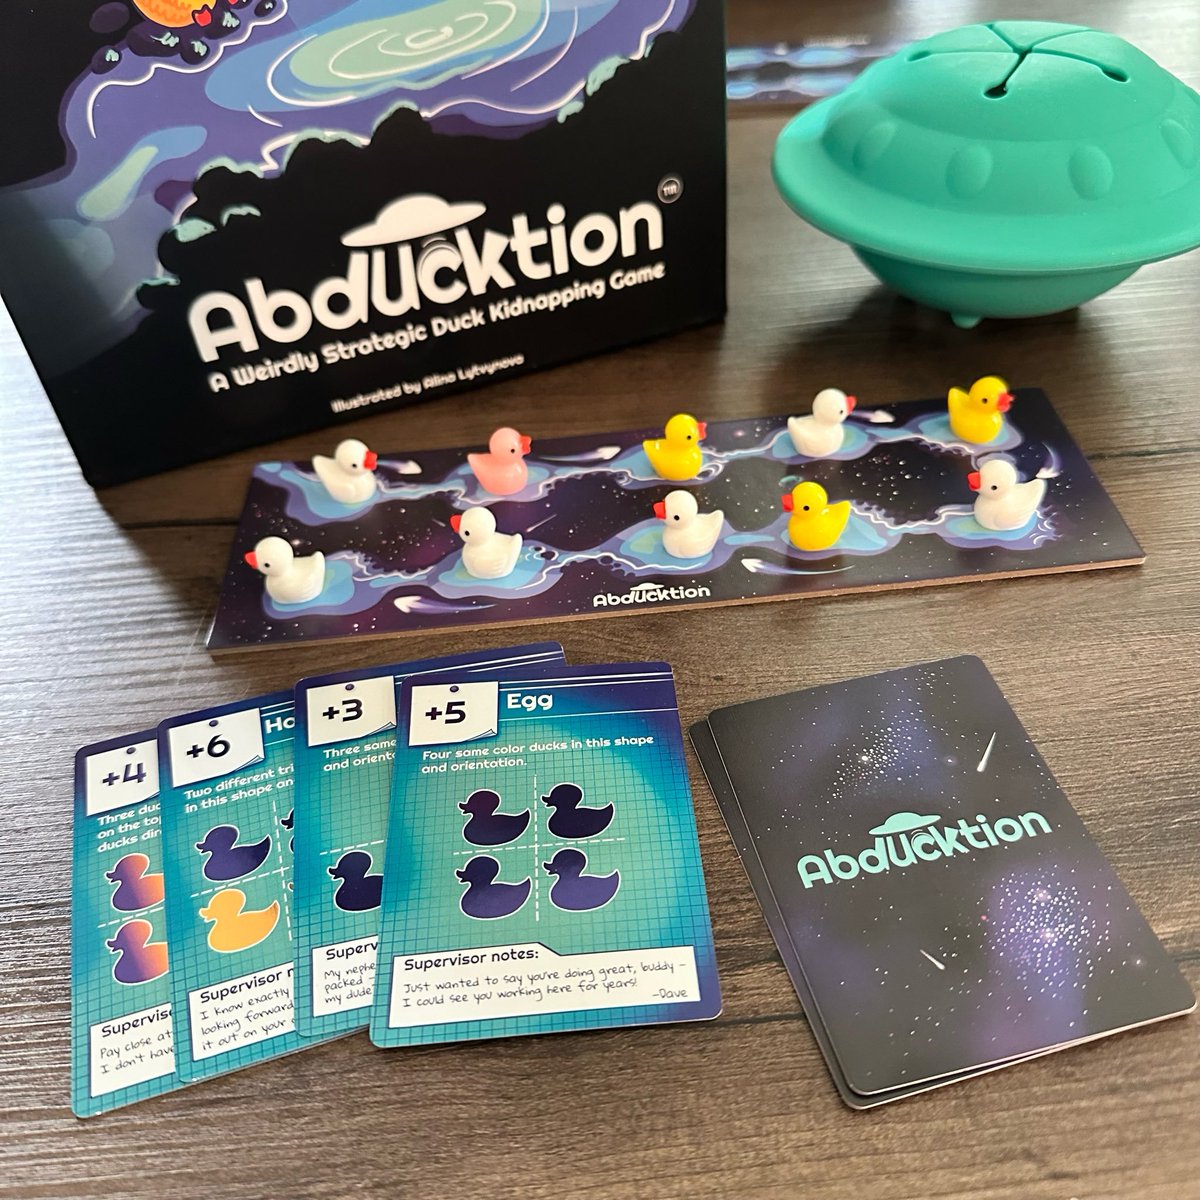 Kristin played AbDUCKtion by Evan & Josh's Very Special Games at a #gameday this past weekend. We've loved all 5 of their #games so far! AbDUCKtion is strategy mixed with a humor & fun #game pieces - a spaceship full of ducks! Keep 'em coming, Evan & Josh! #WhatDidYouPlayMondays